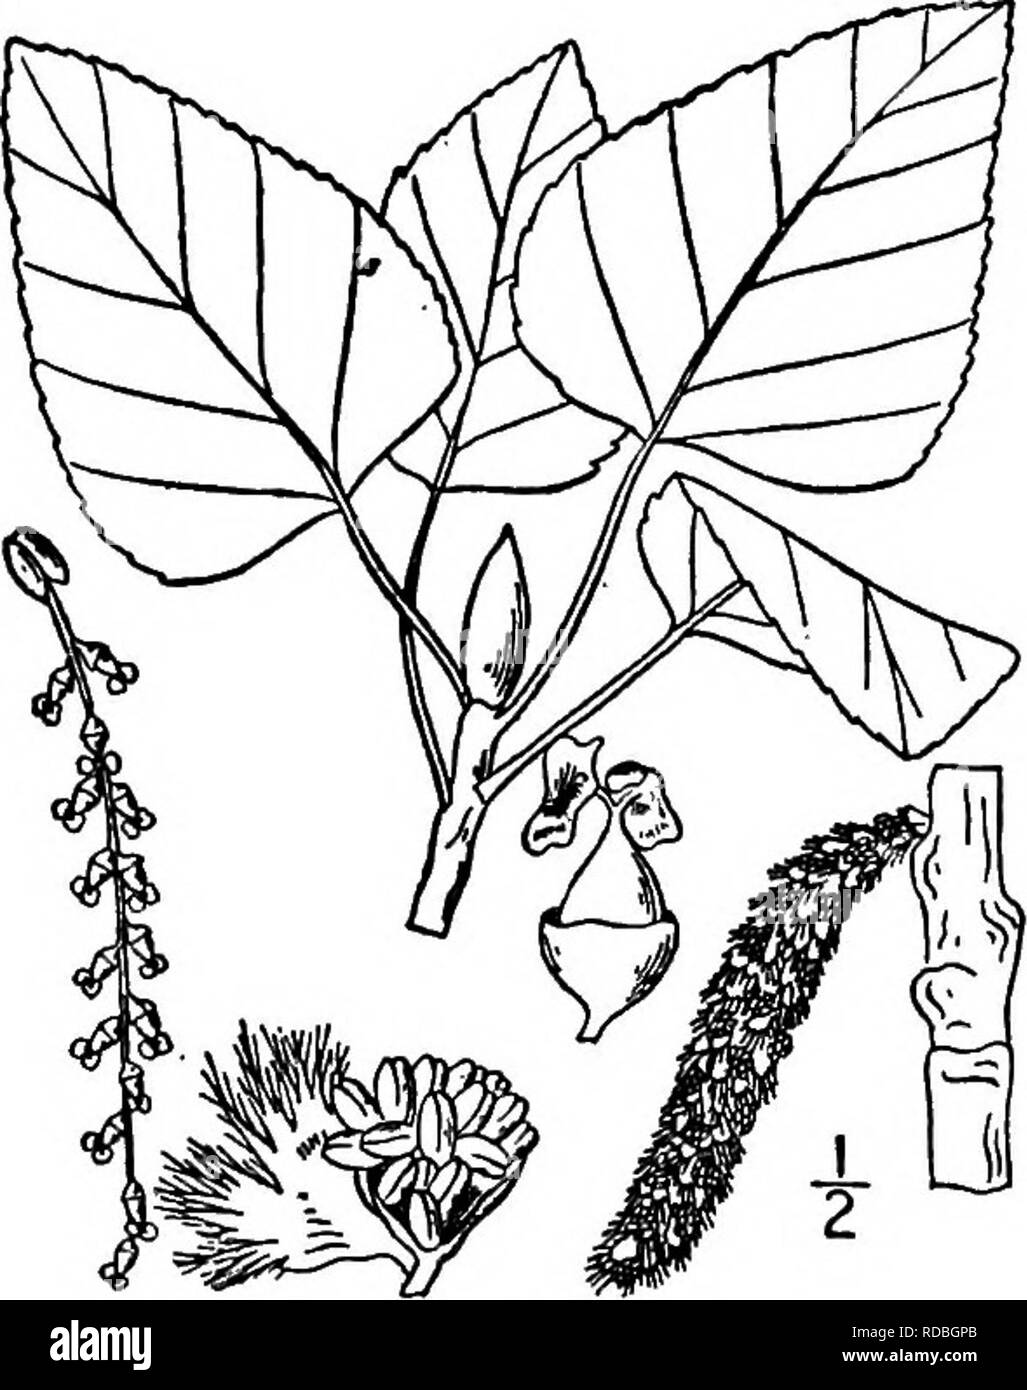 . North American trees : being descriptions and illustrations of the trees growing independently of cultivation in North America, north of Mexico and the West Indies . Trees. Fig. 126. — Rydberg's Cottonwood. 6. BALSAM POPLAR — Populus balsamifera Linnaeus The Balsam poplar, or Tacamahac, inhabits either moist or dry soil, but prefers river and lake shores and the edges of swamps, sometimes reaching a height of 30 meters or more, with a trunk 2 to 2.3 meters in diameter. It is dis- tributed from Newfoundland to Hudson Bay and Alaska, south to Maine, Vermont, western New York, Michigan, South D Stock Photo